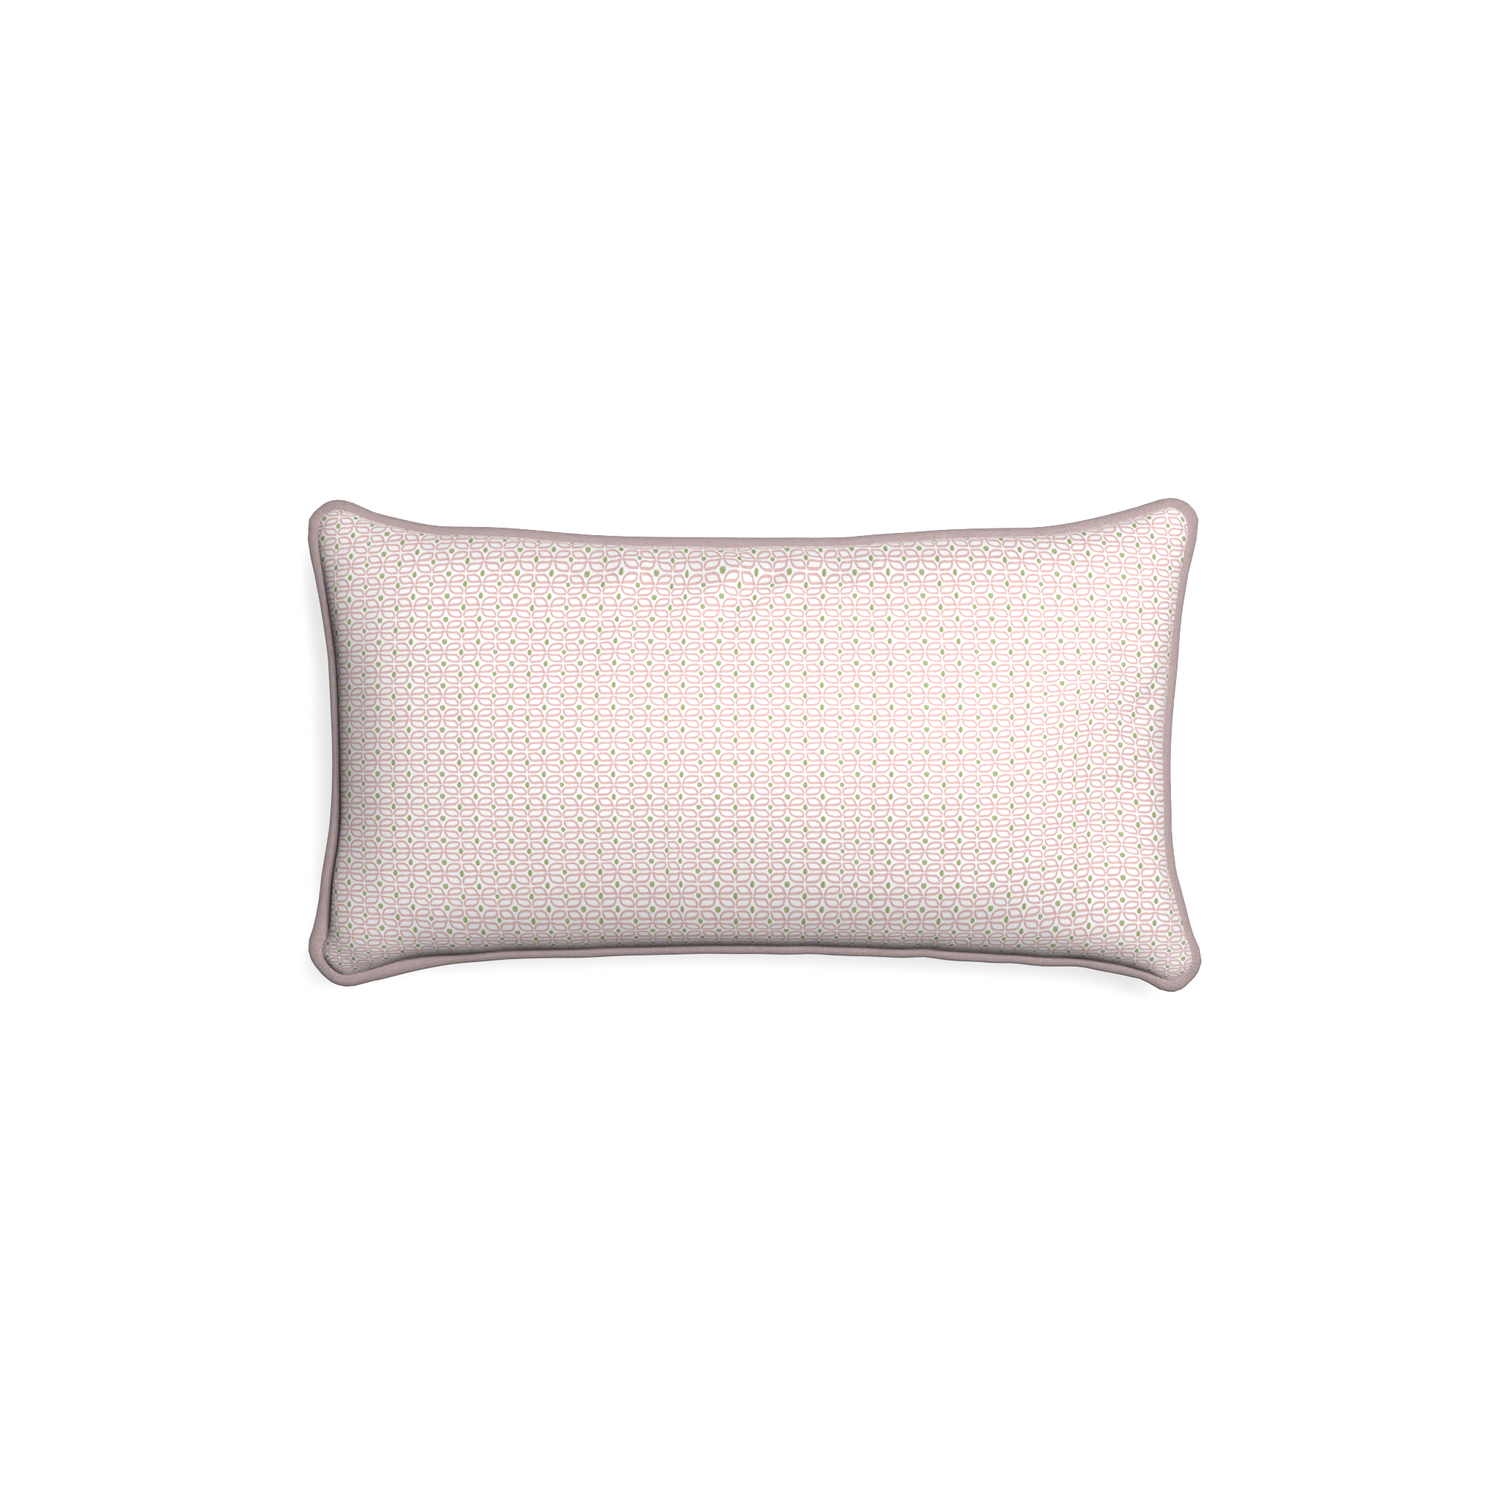 Petite-lumbar loomi pink custom pink geometricpillow with orchid piping on white background